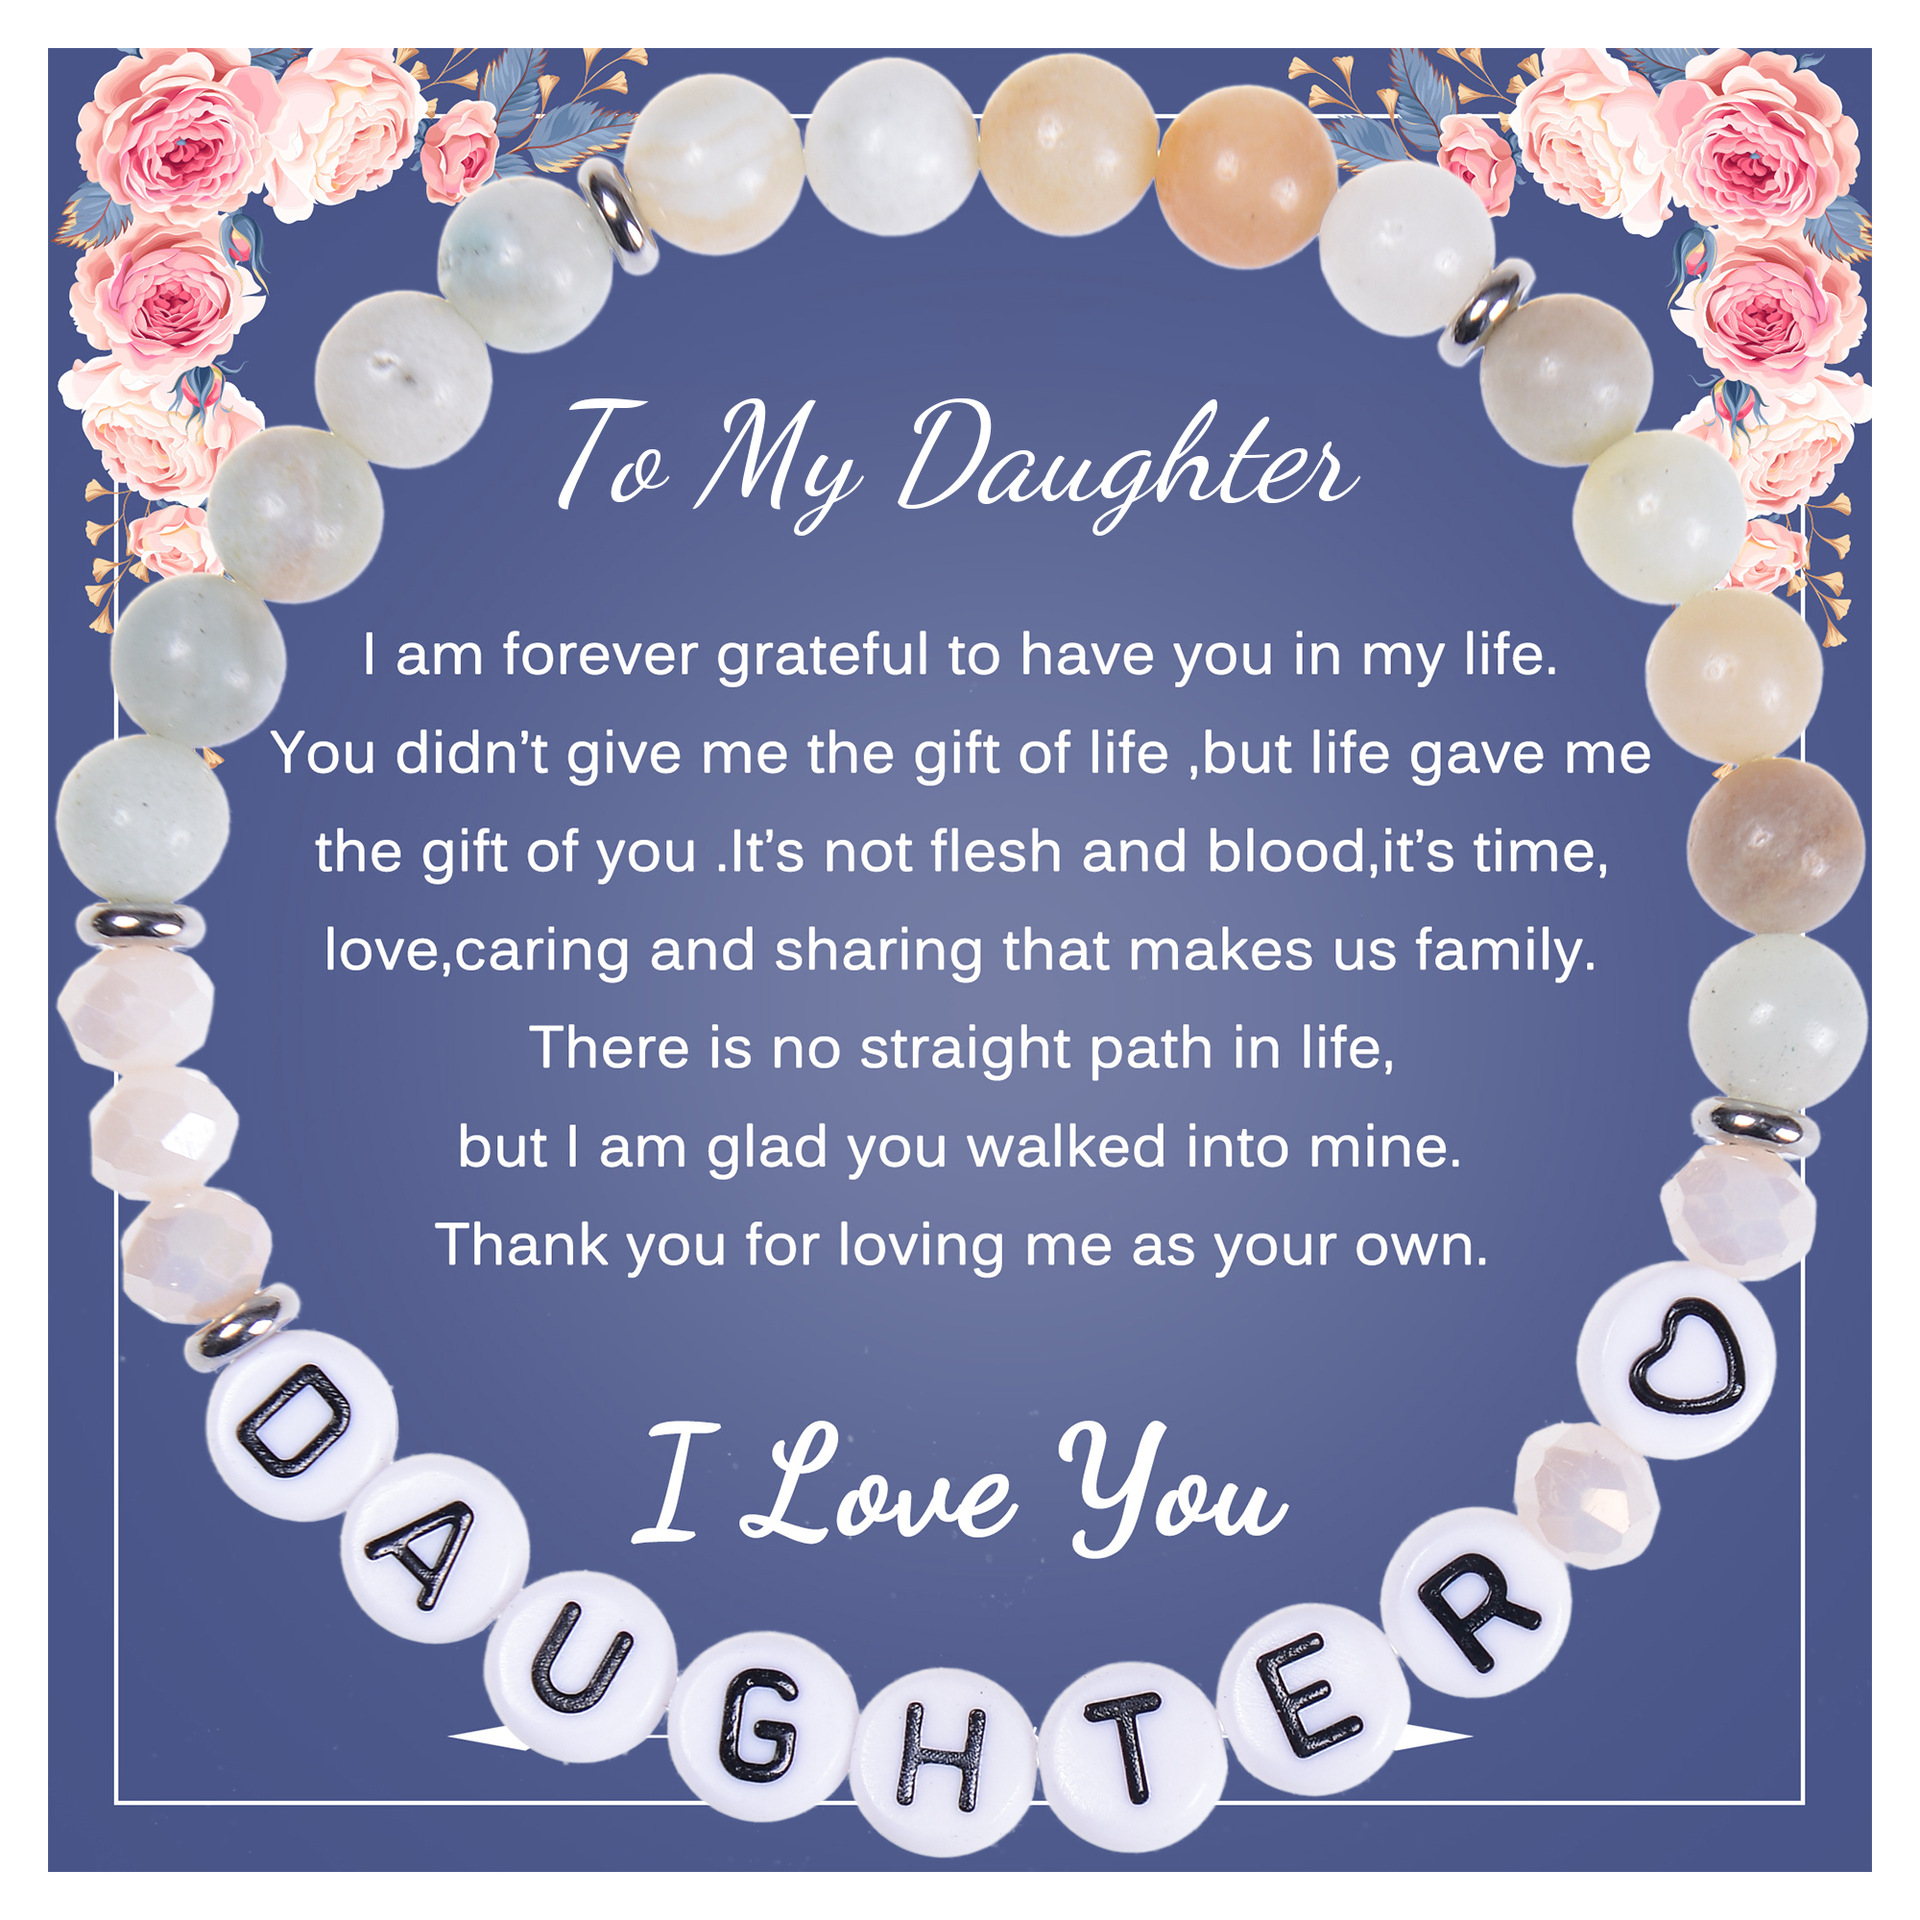 2:To My Daughter